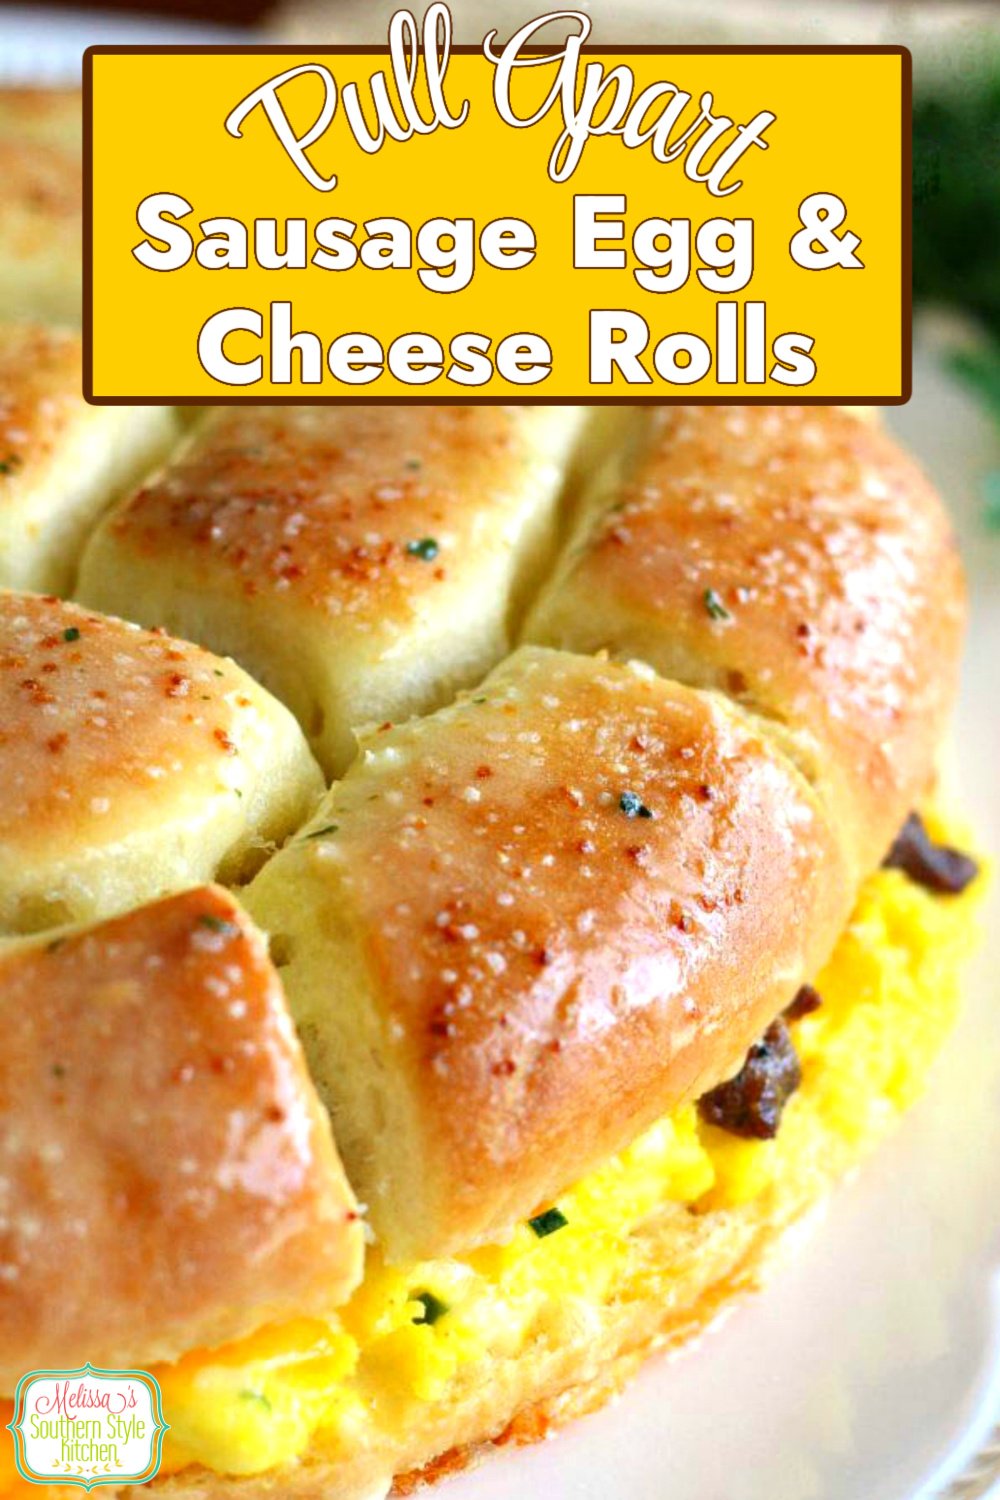 These buttery Pull Apart Sausage Egg and Cheese Rolls will make a tasty start to your day #rolls #sausageandeggs #sausageeggandcheeserolls #breadrecipes #breakfast #brunch #holidaybrunch #eggs #eggrecipes #pork #southernfood #southernrecipes via @melissasssk